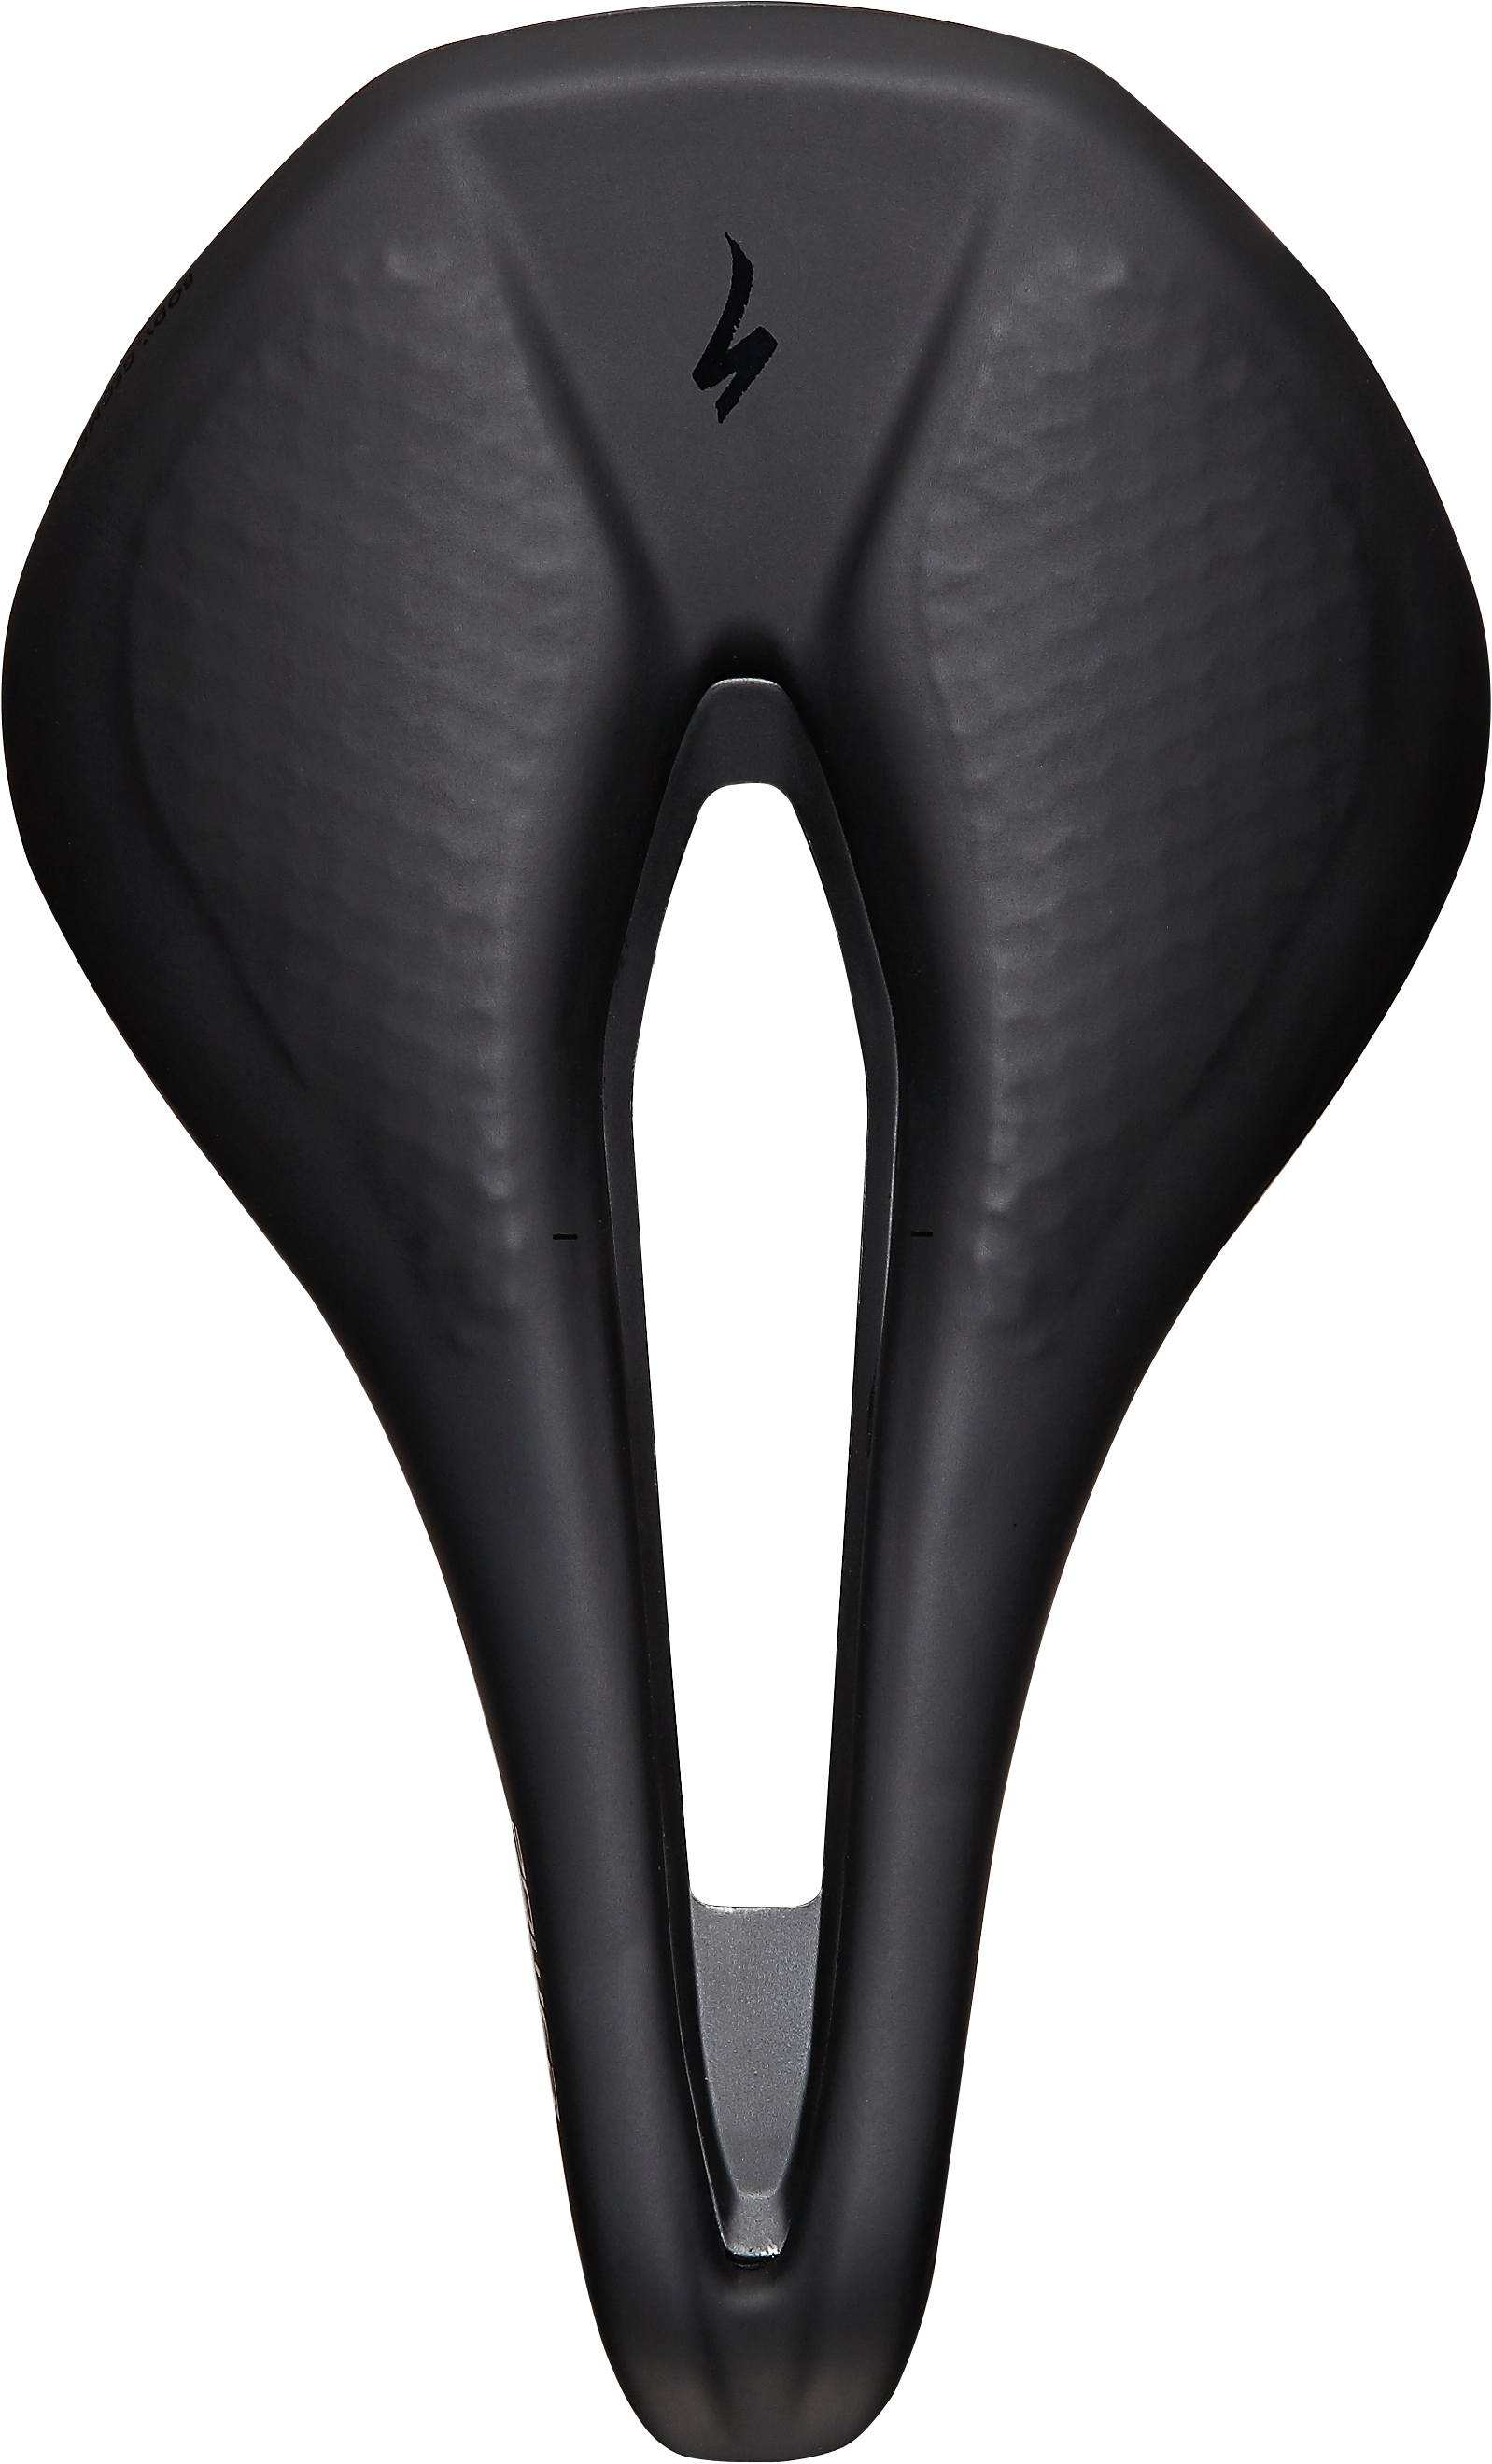 SPECIALIZED POWER EXPERT MIRROR 143